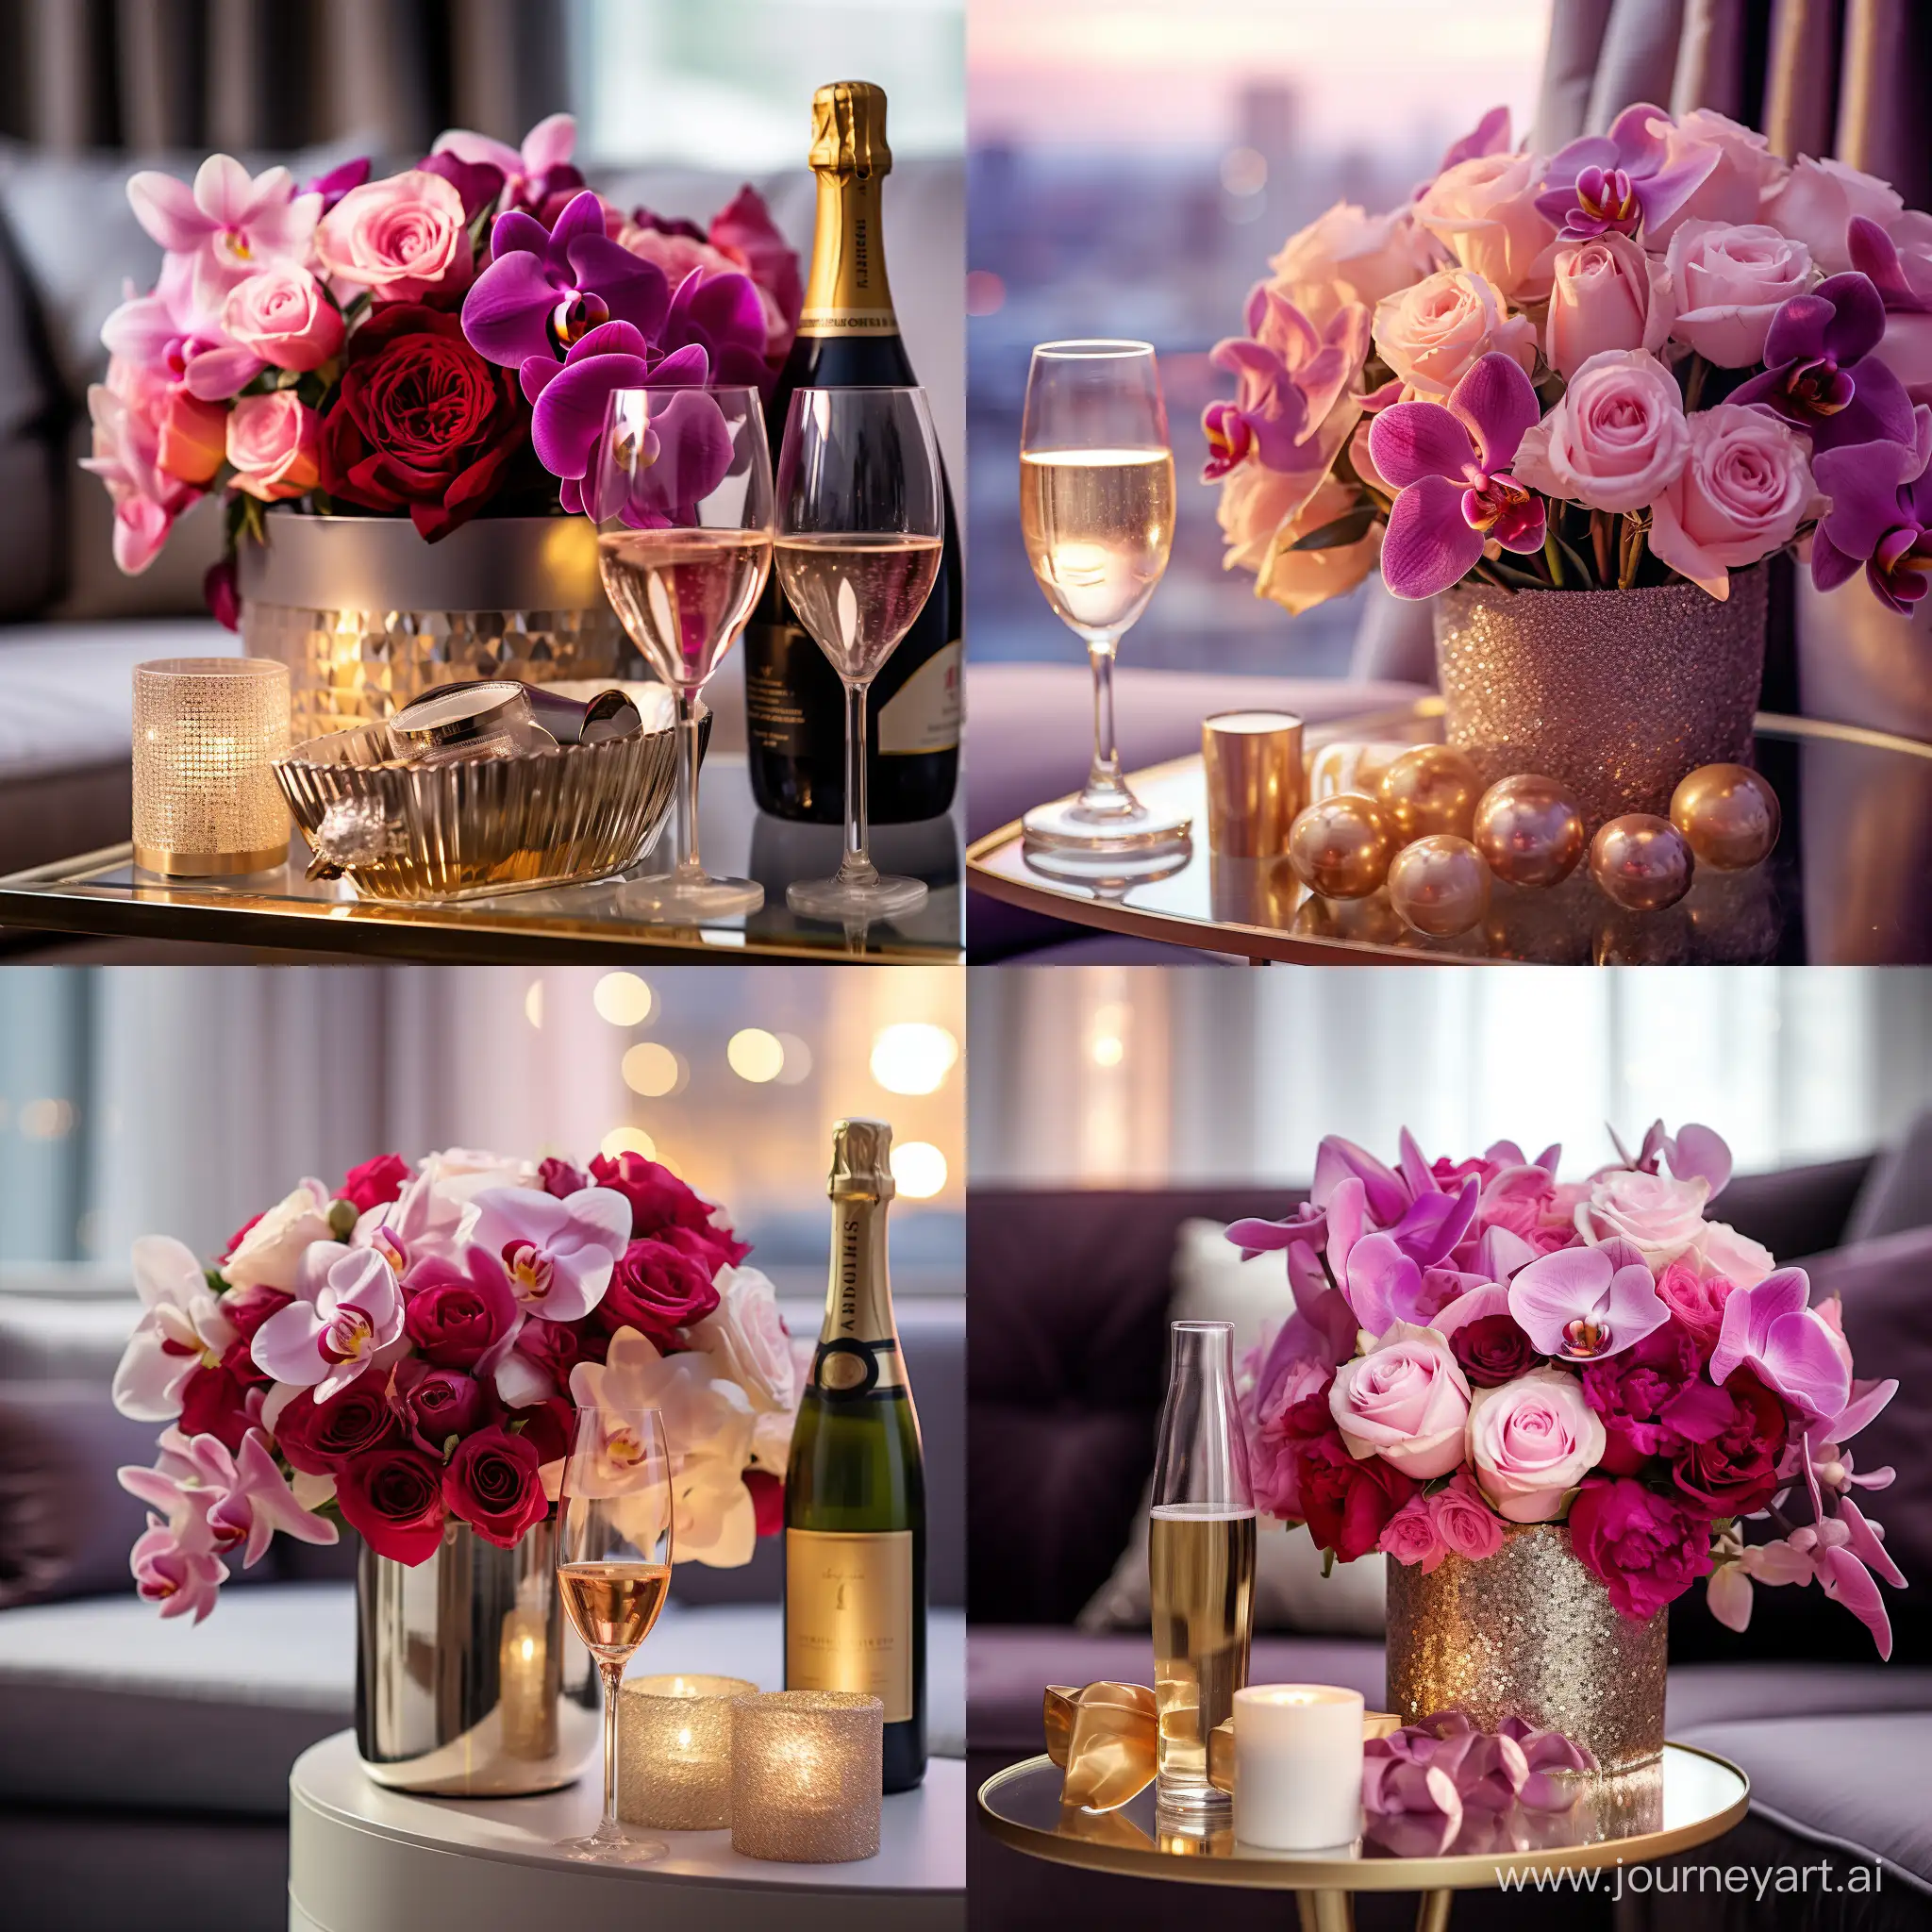 Luxurious-Floral-Elegance-VersaceInspired-Rose-Peony-and-Orchid-Arrangement-in-Minimalistic-Living-Space